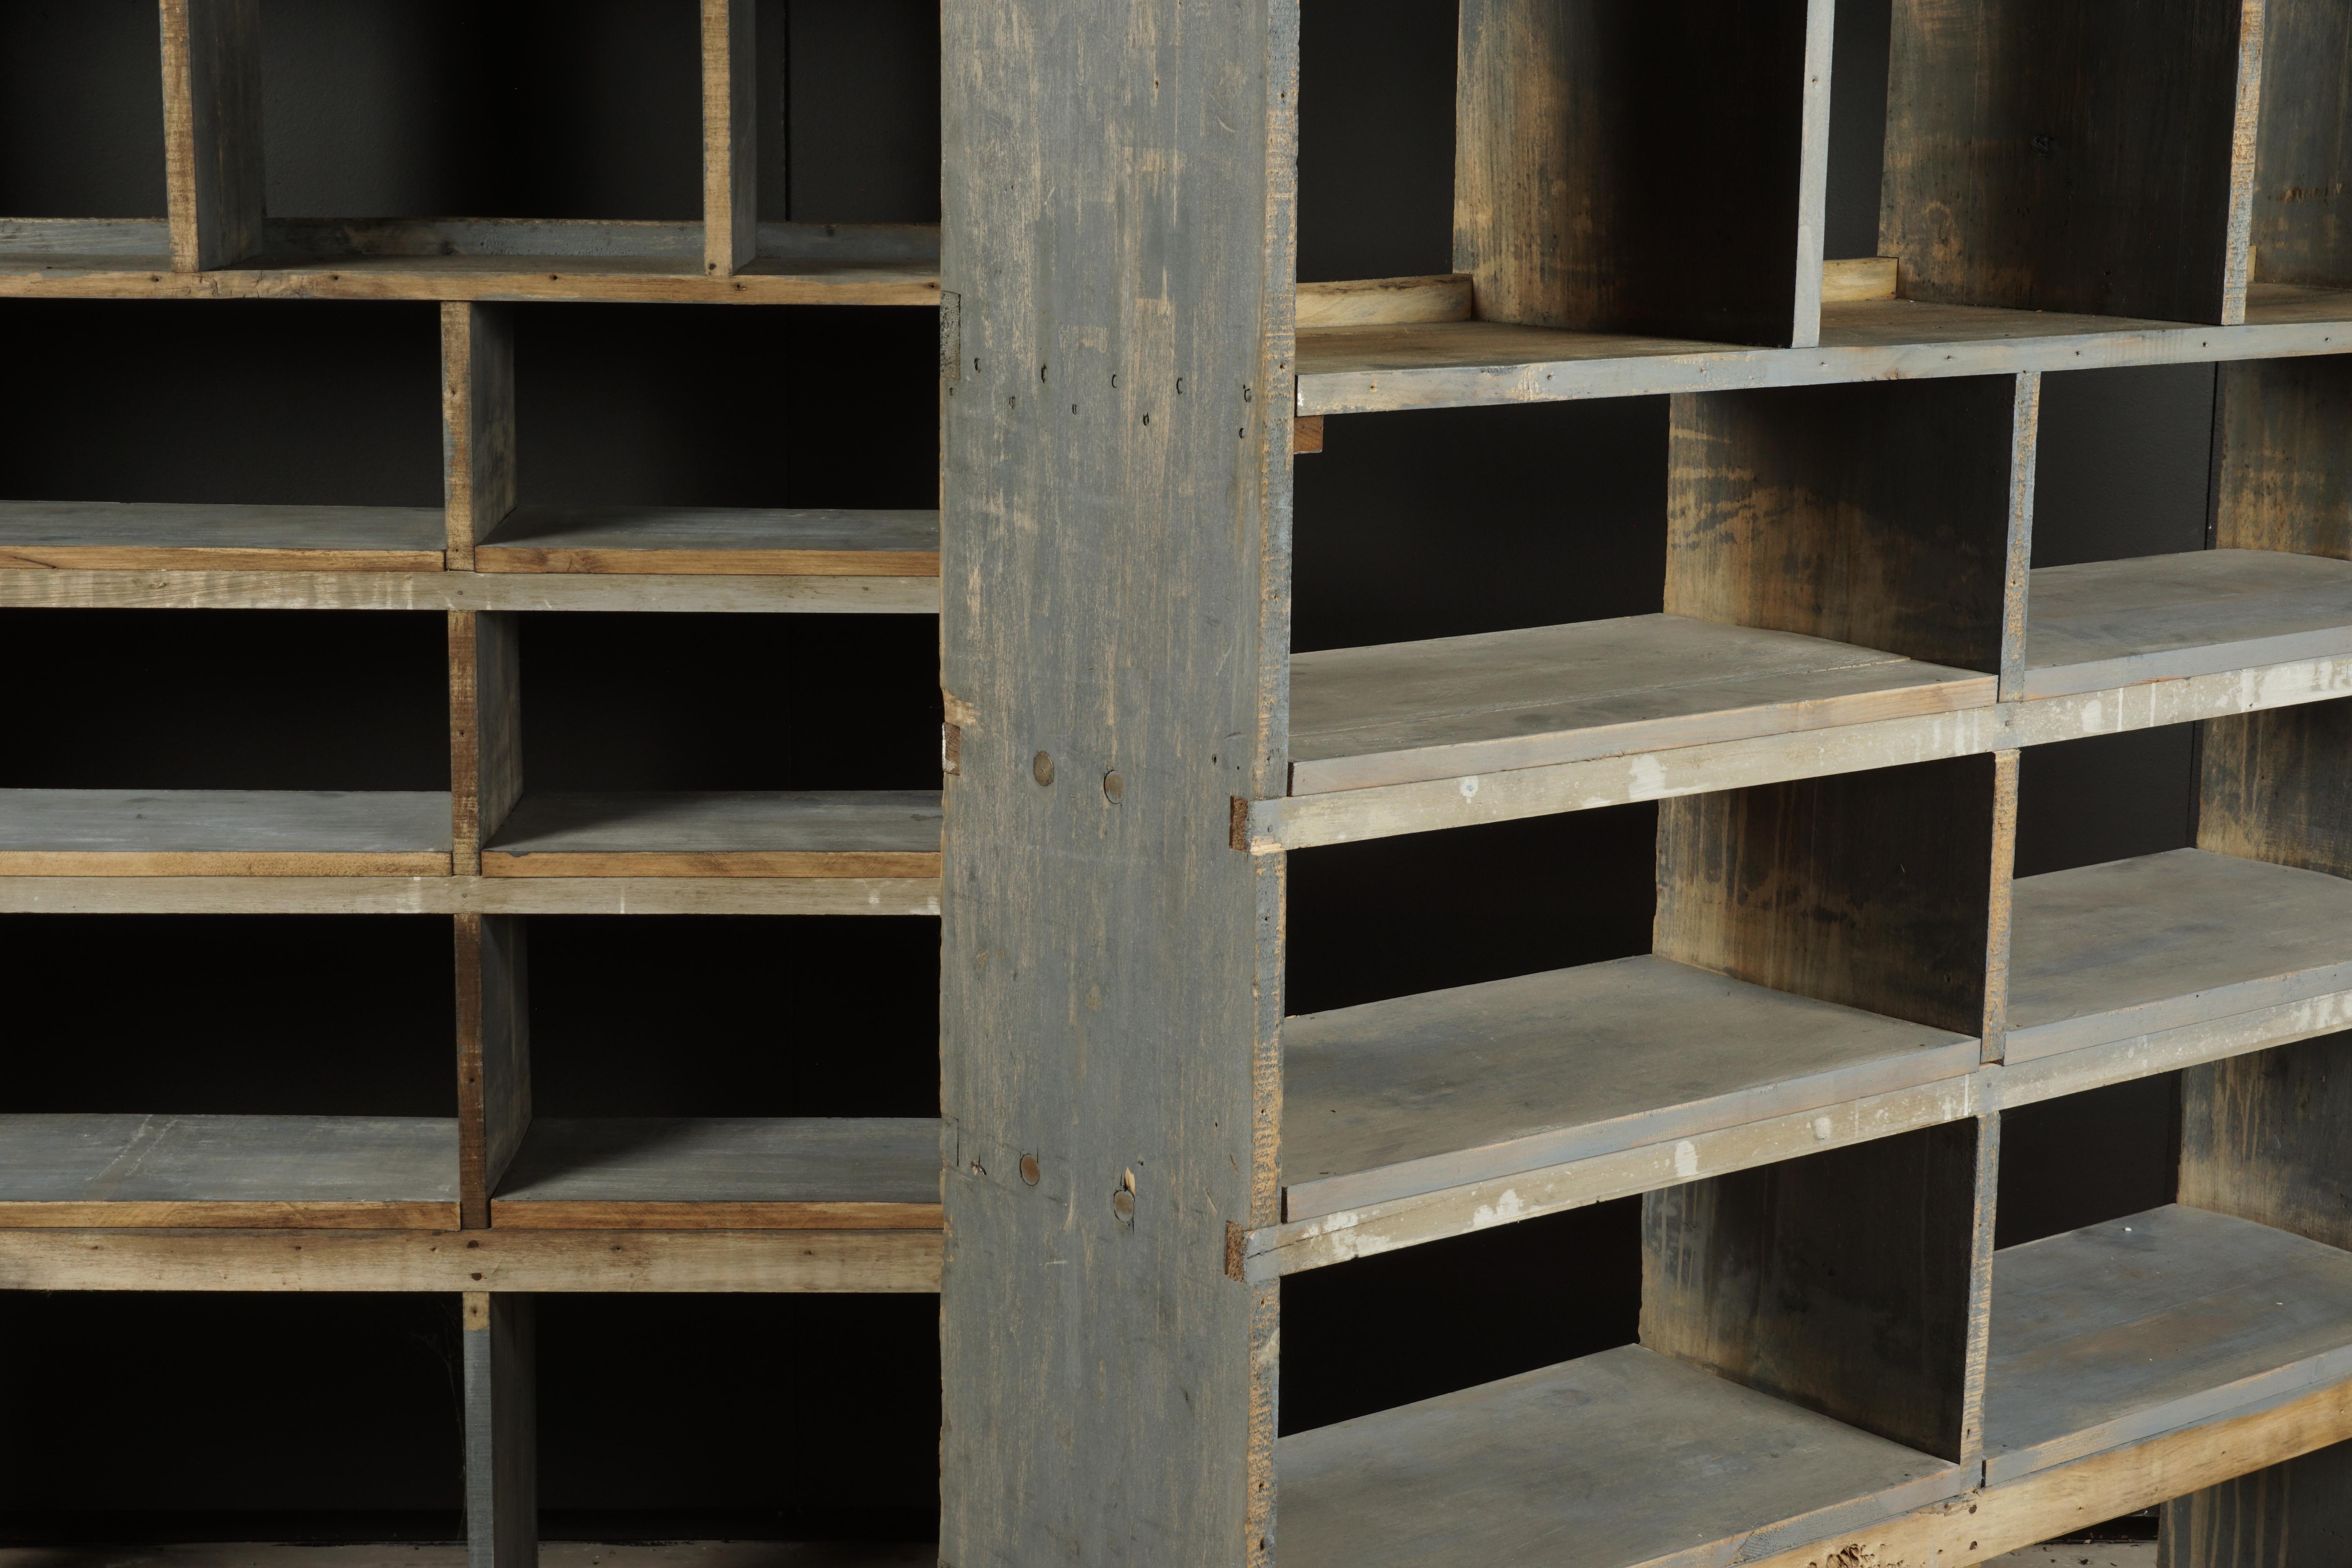 European Pair of Vintage Industrial Bookcases from France, circa 1940